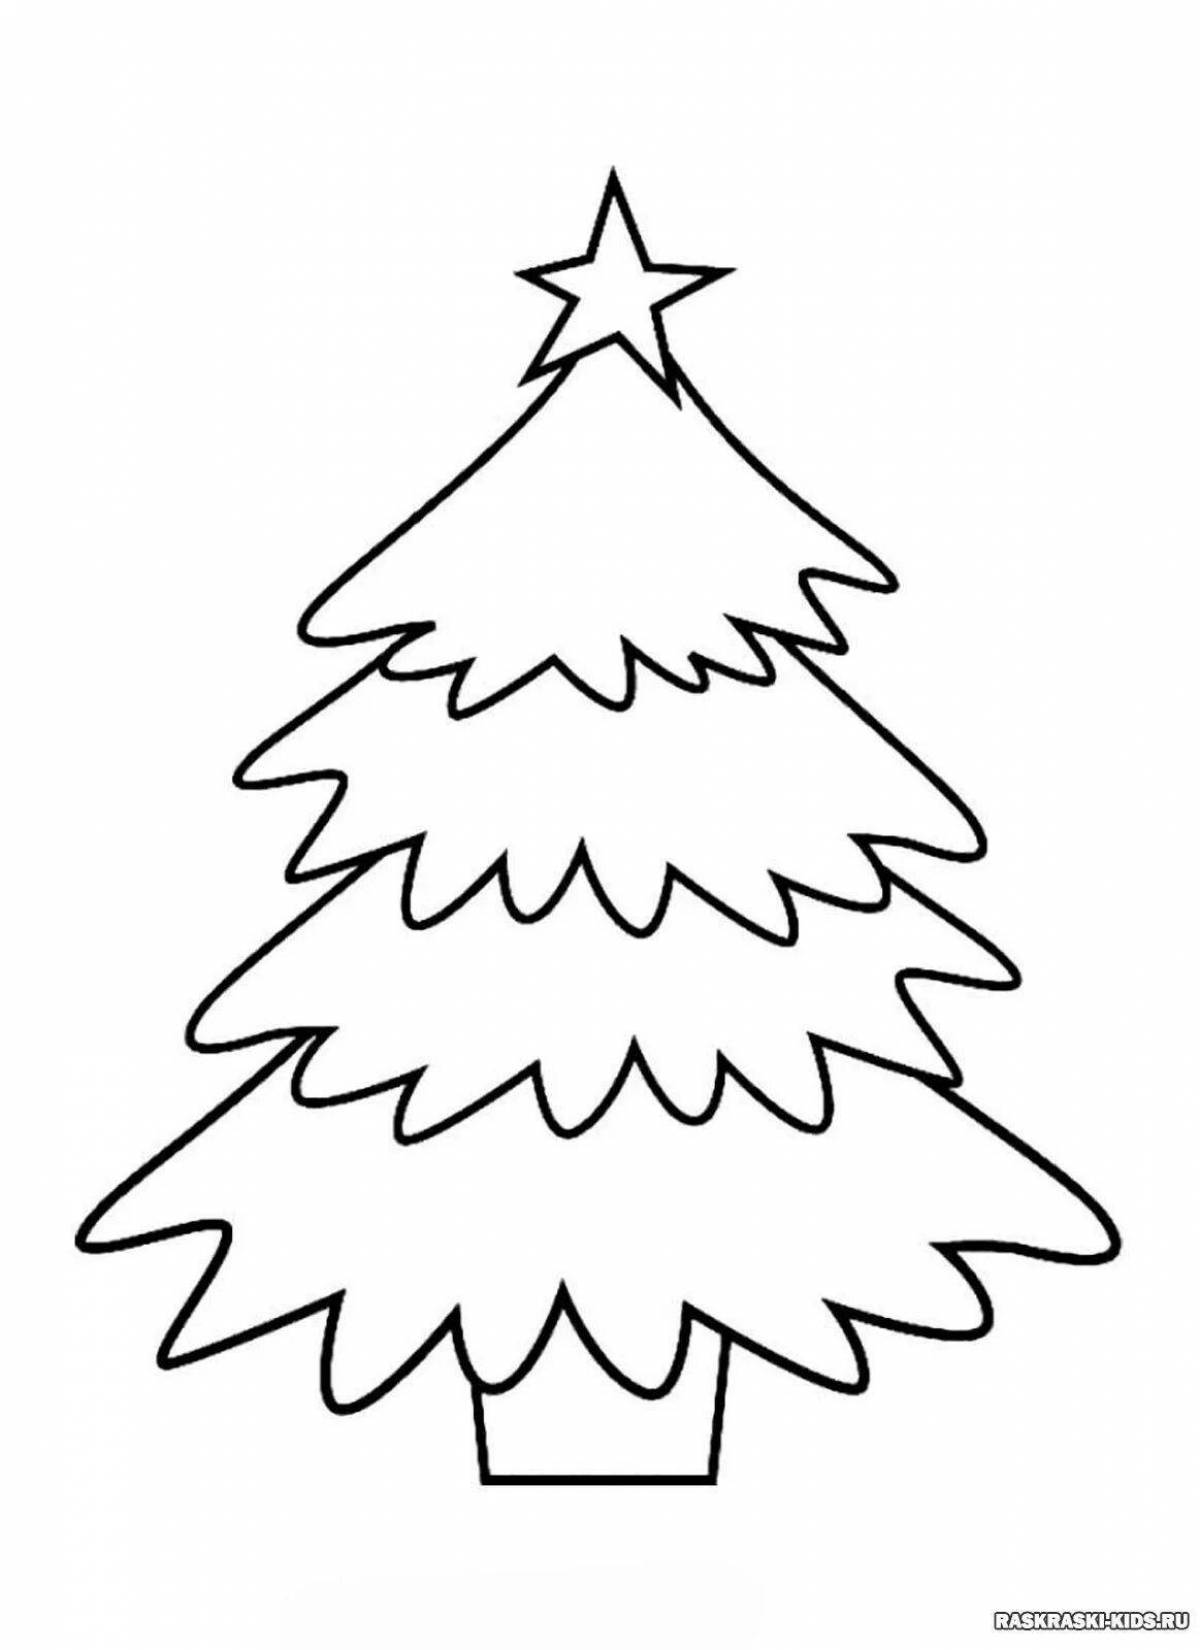 Adorable Christmas tree pattern for kids